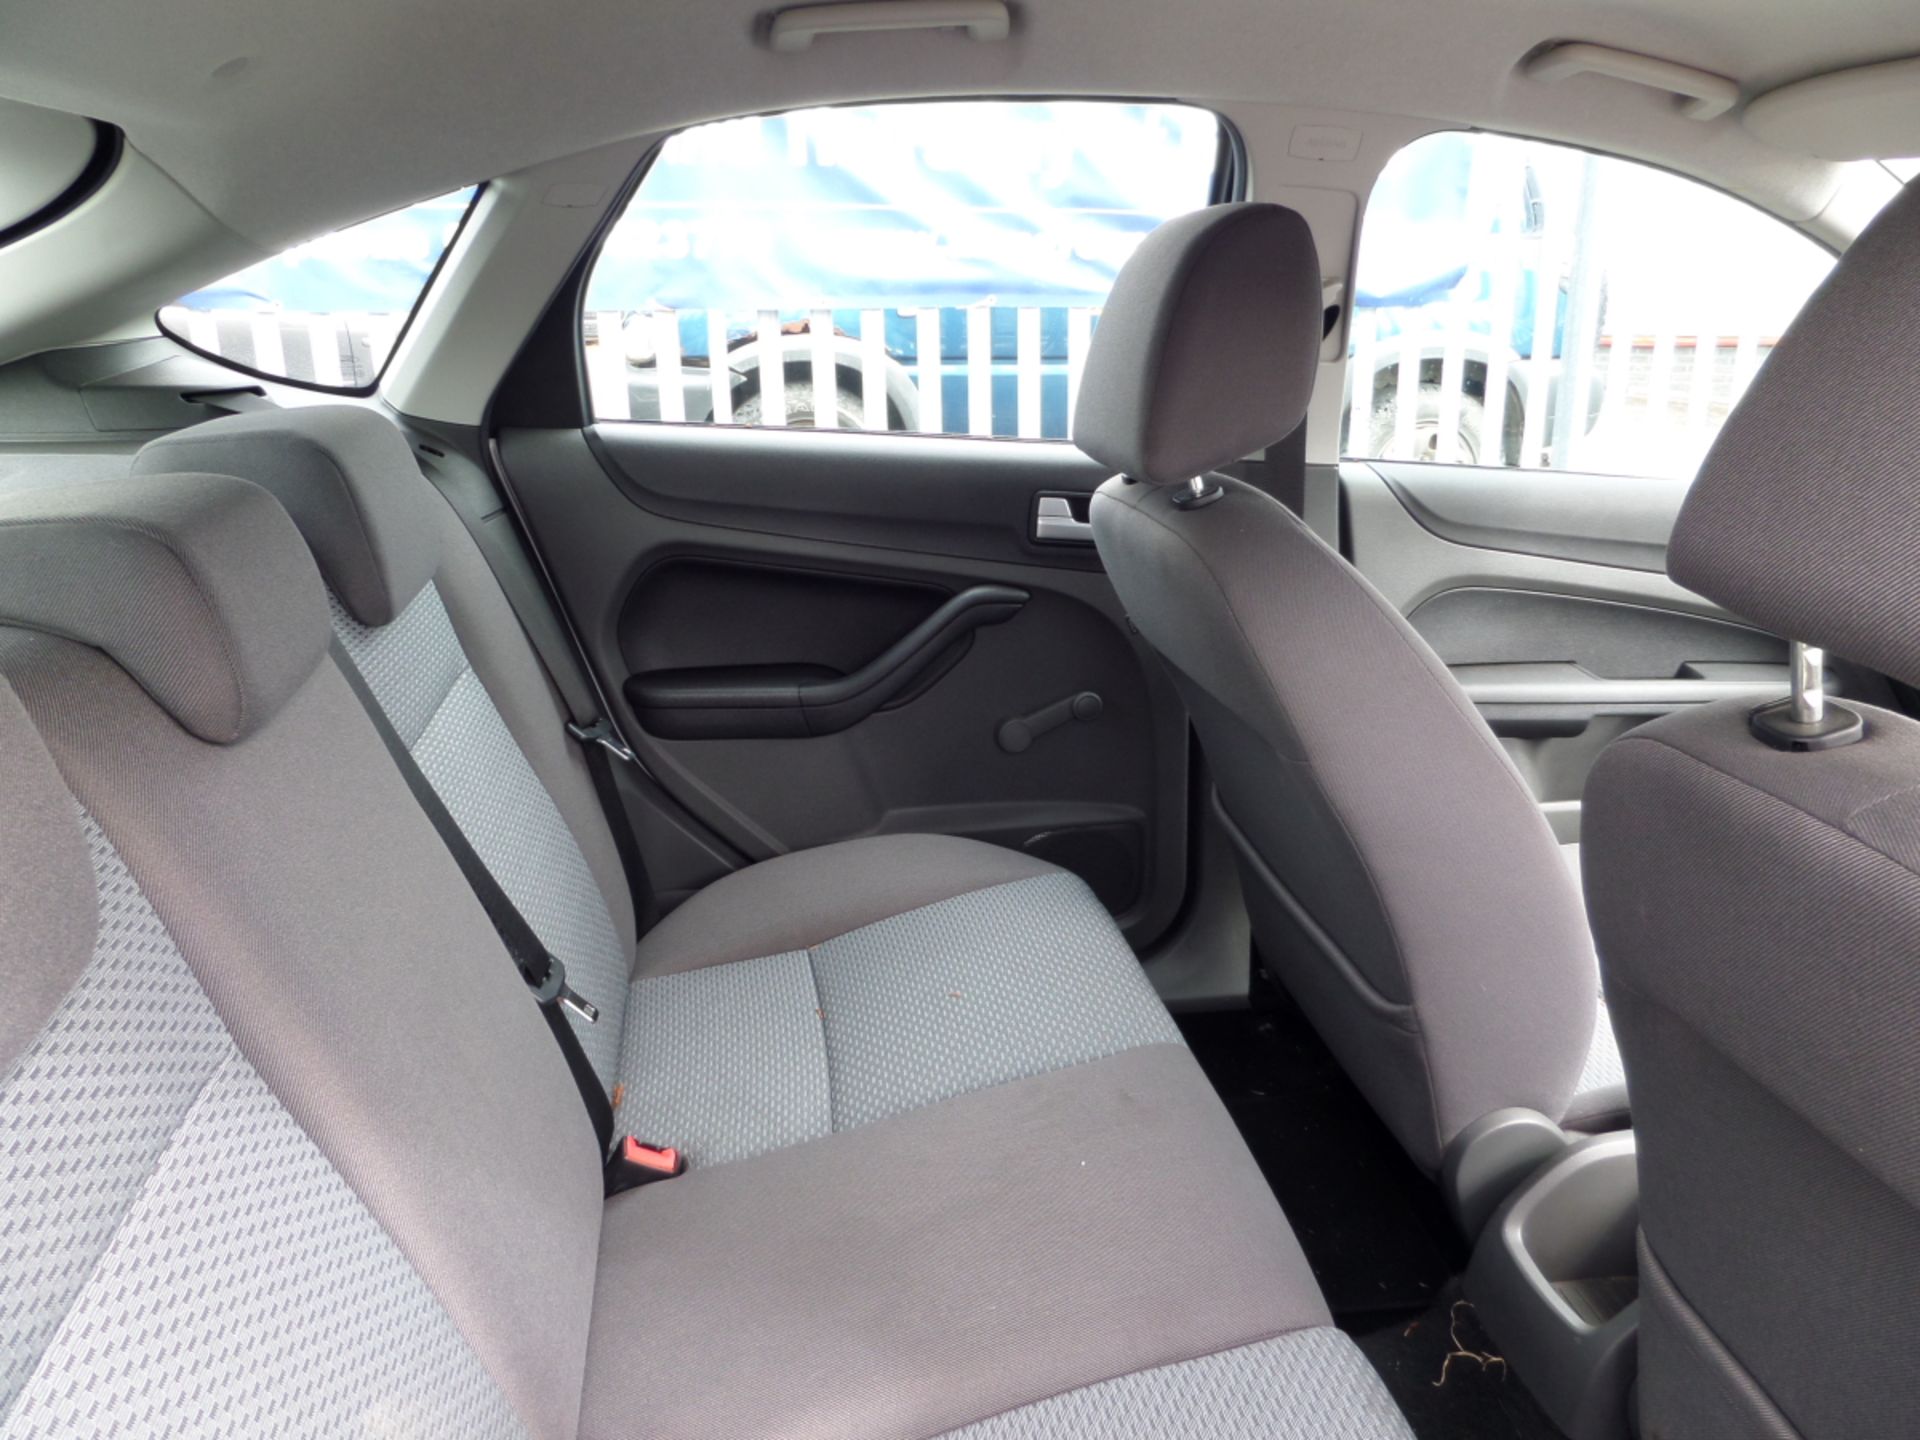 Ford Focus Style 125 - 1798cc 5 Door - Image 10 of 11